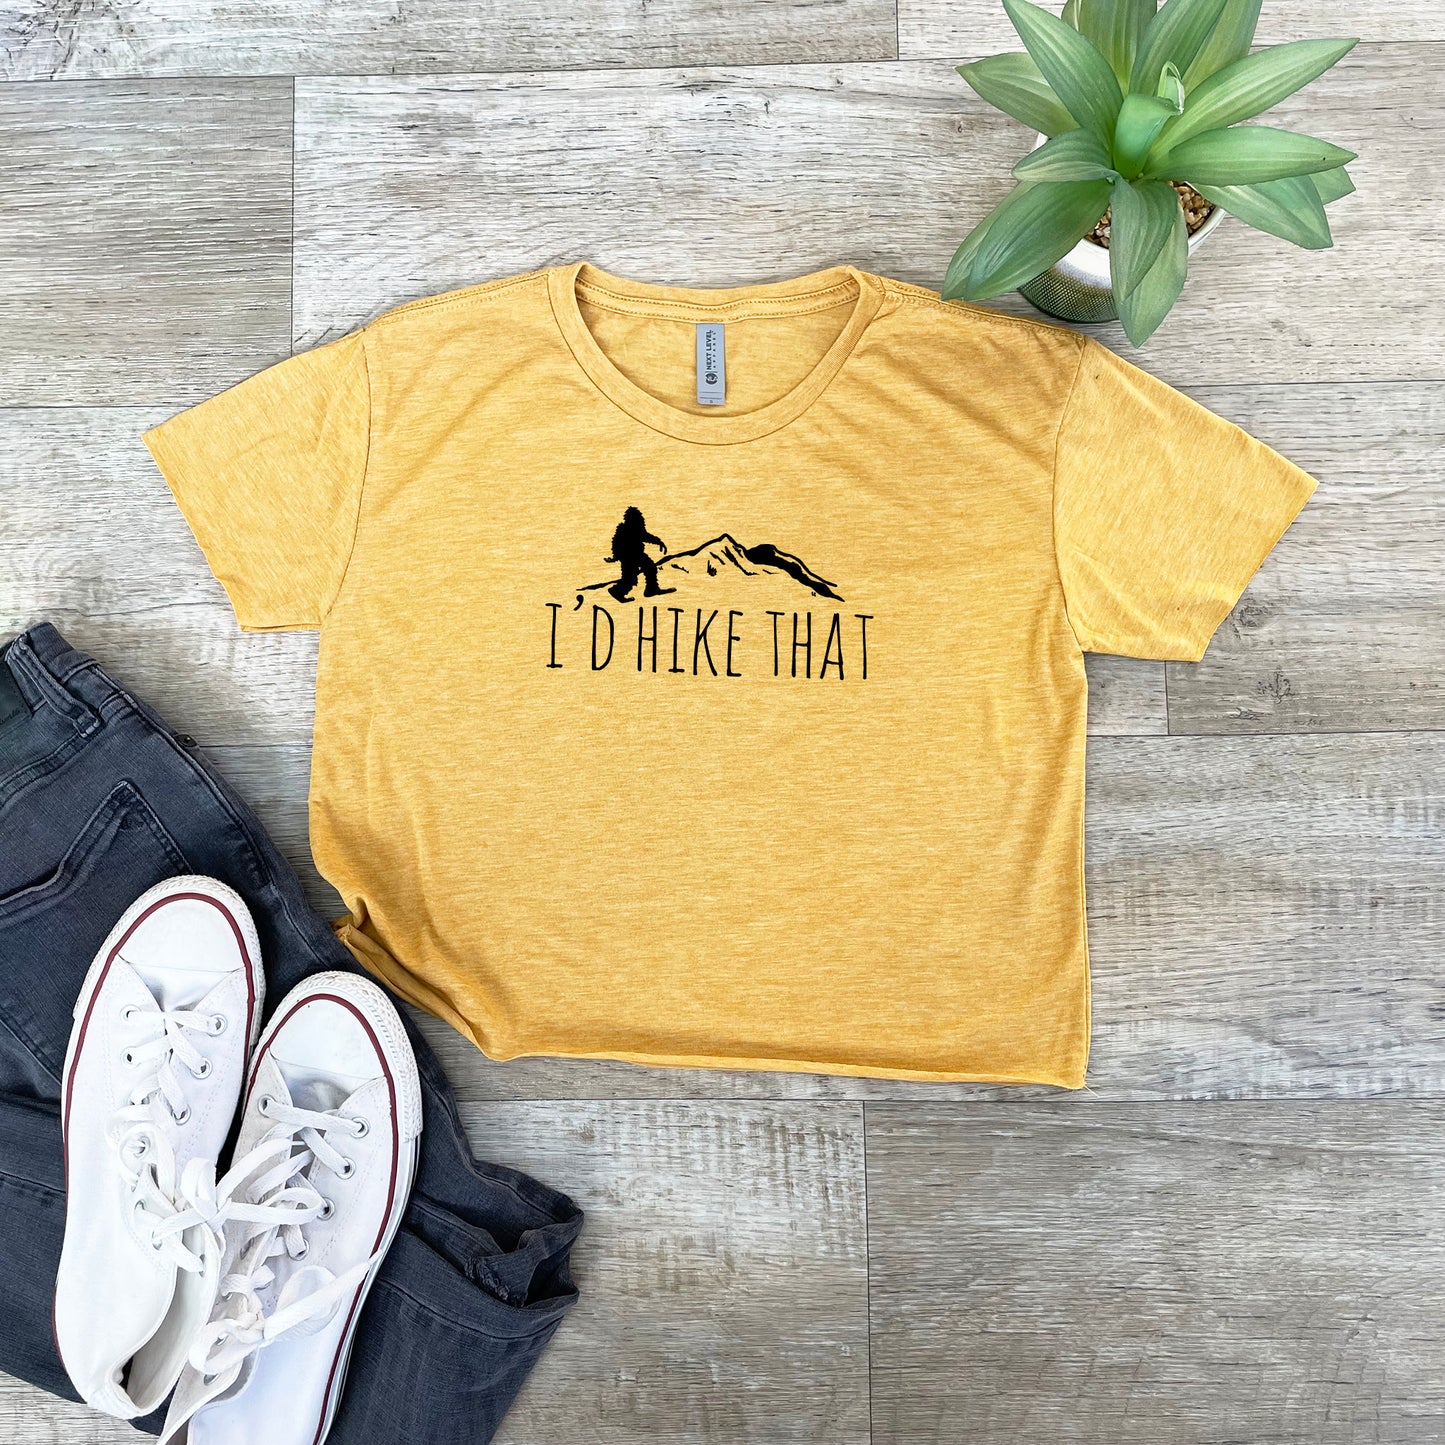 I'd Hike That - Women's Crop Tee - Heather Gray or Gold